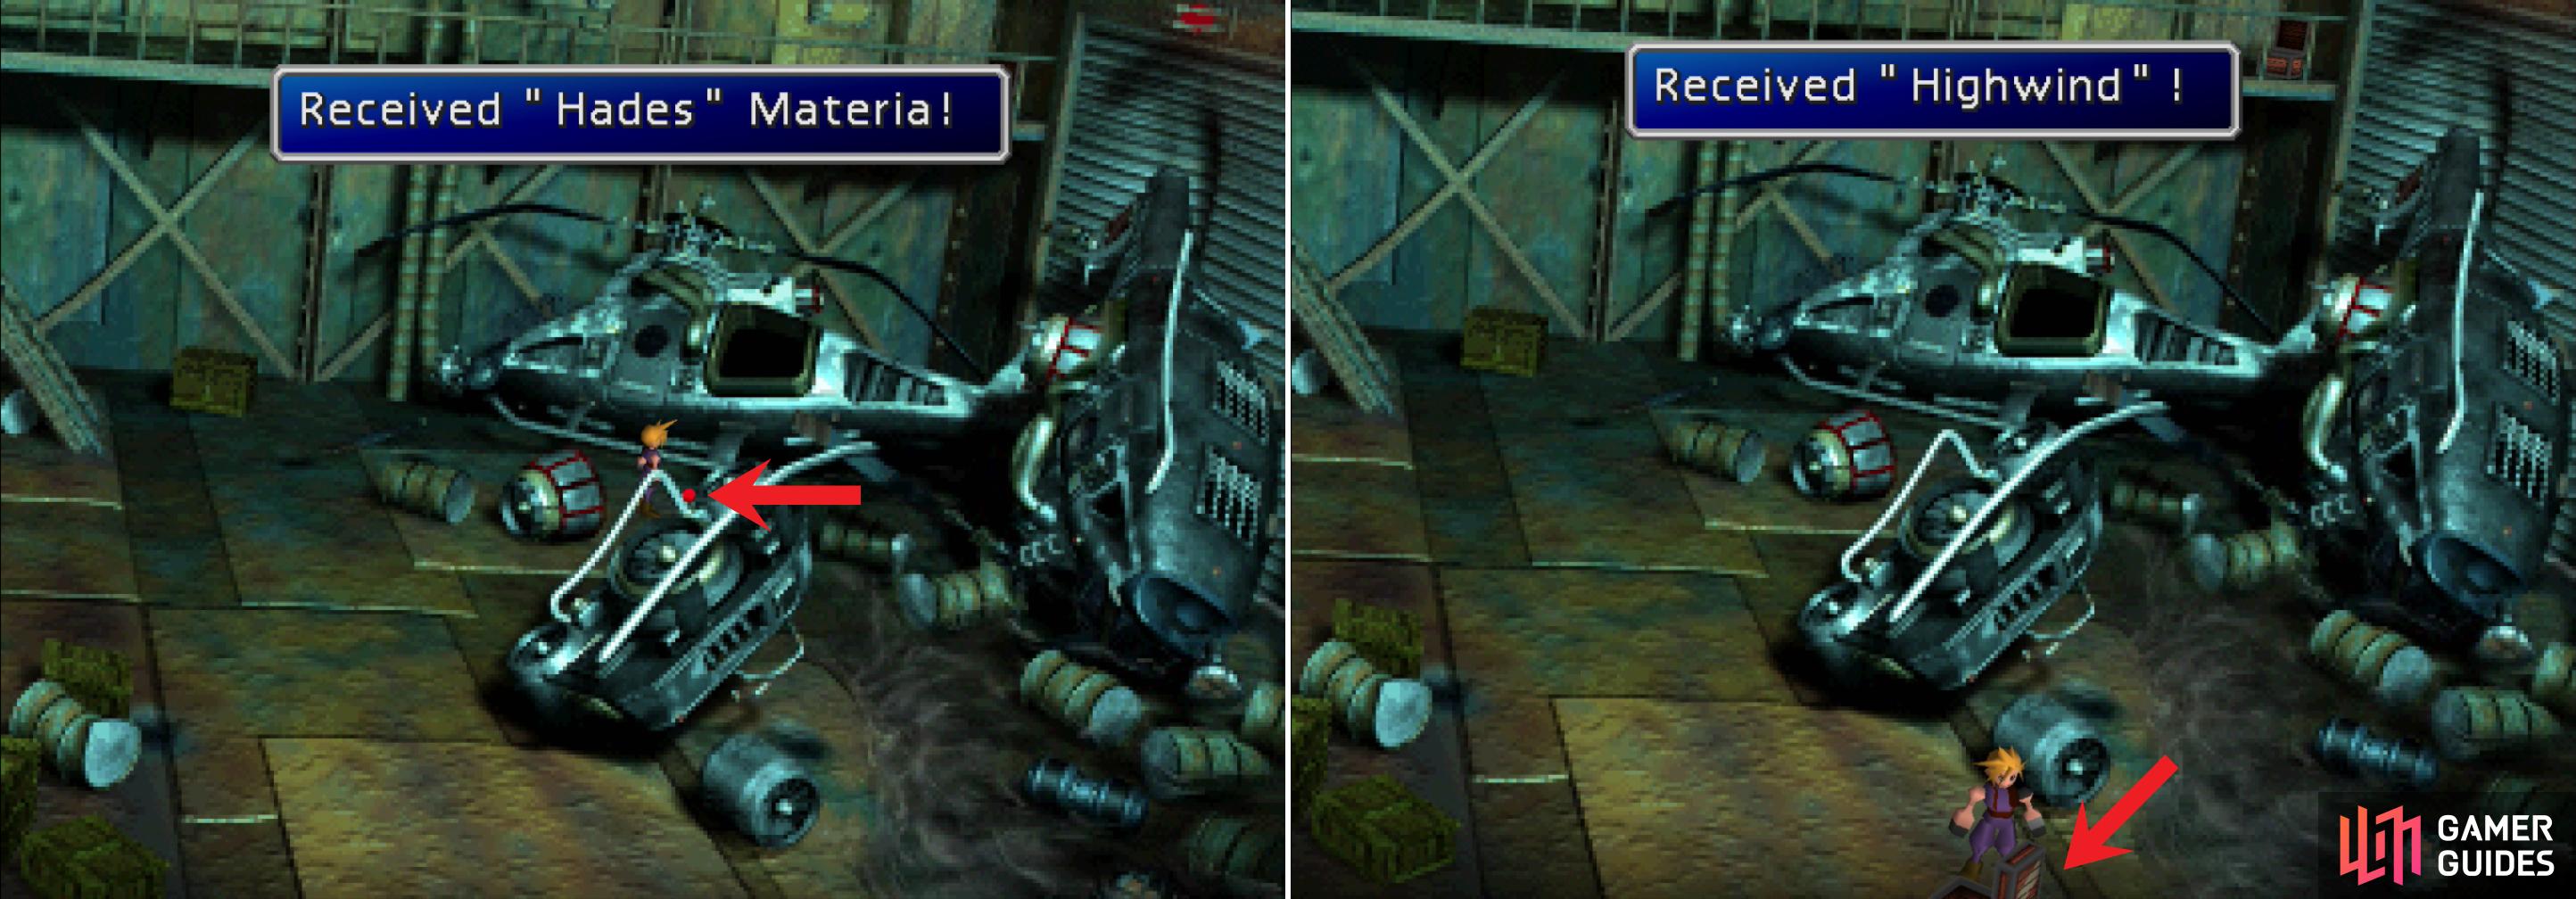 Find a piece of Hades Materia near a ruined helicoptor in the Cargo Room (left) then find Cid’s ultimate Limit Break “Highwind” in a chest along the southern end of the Cargo Room (right).